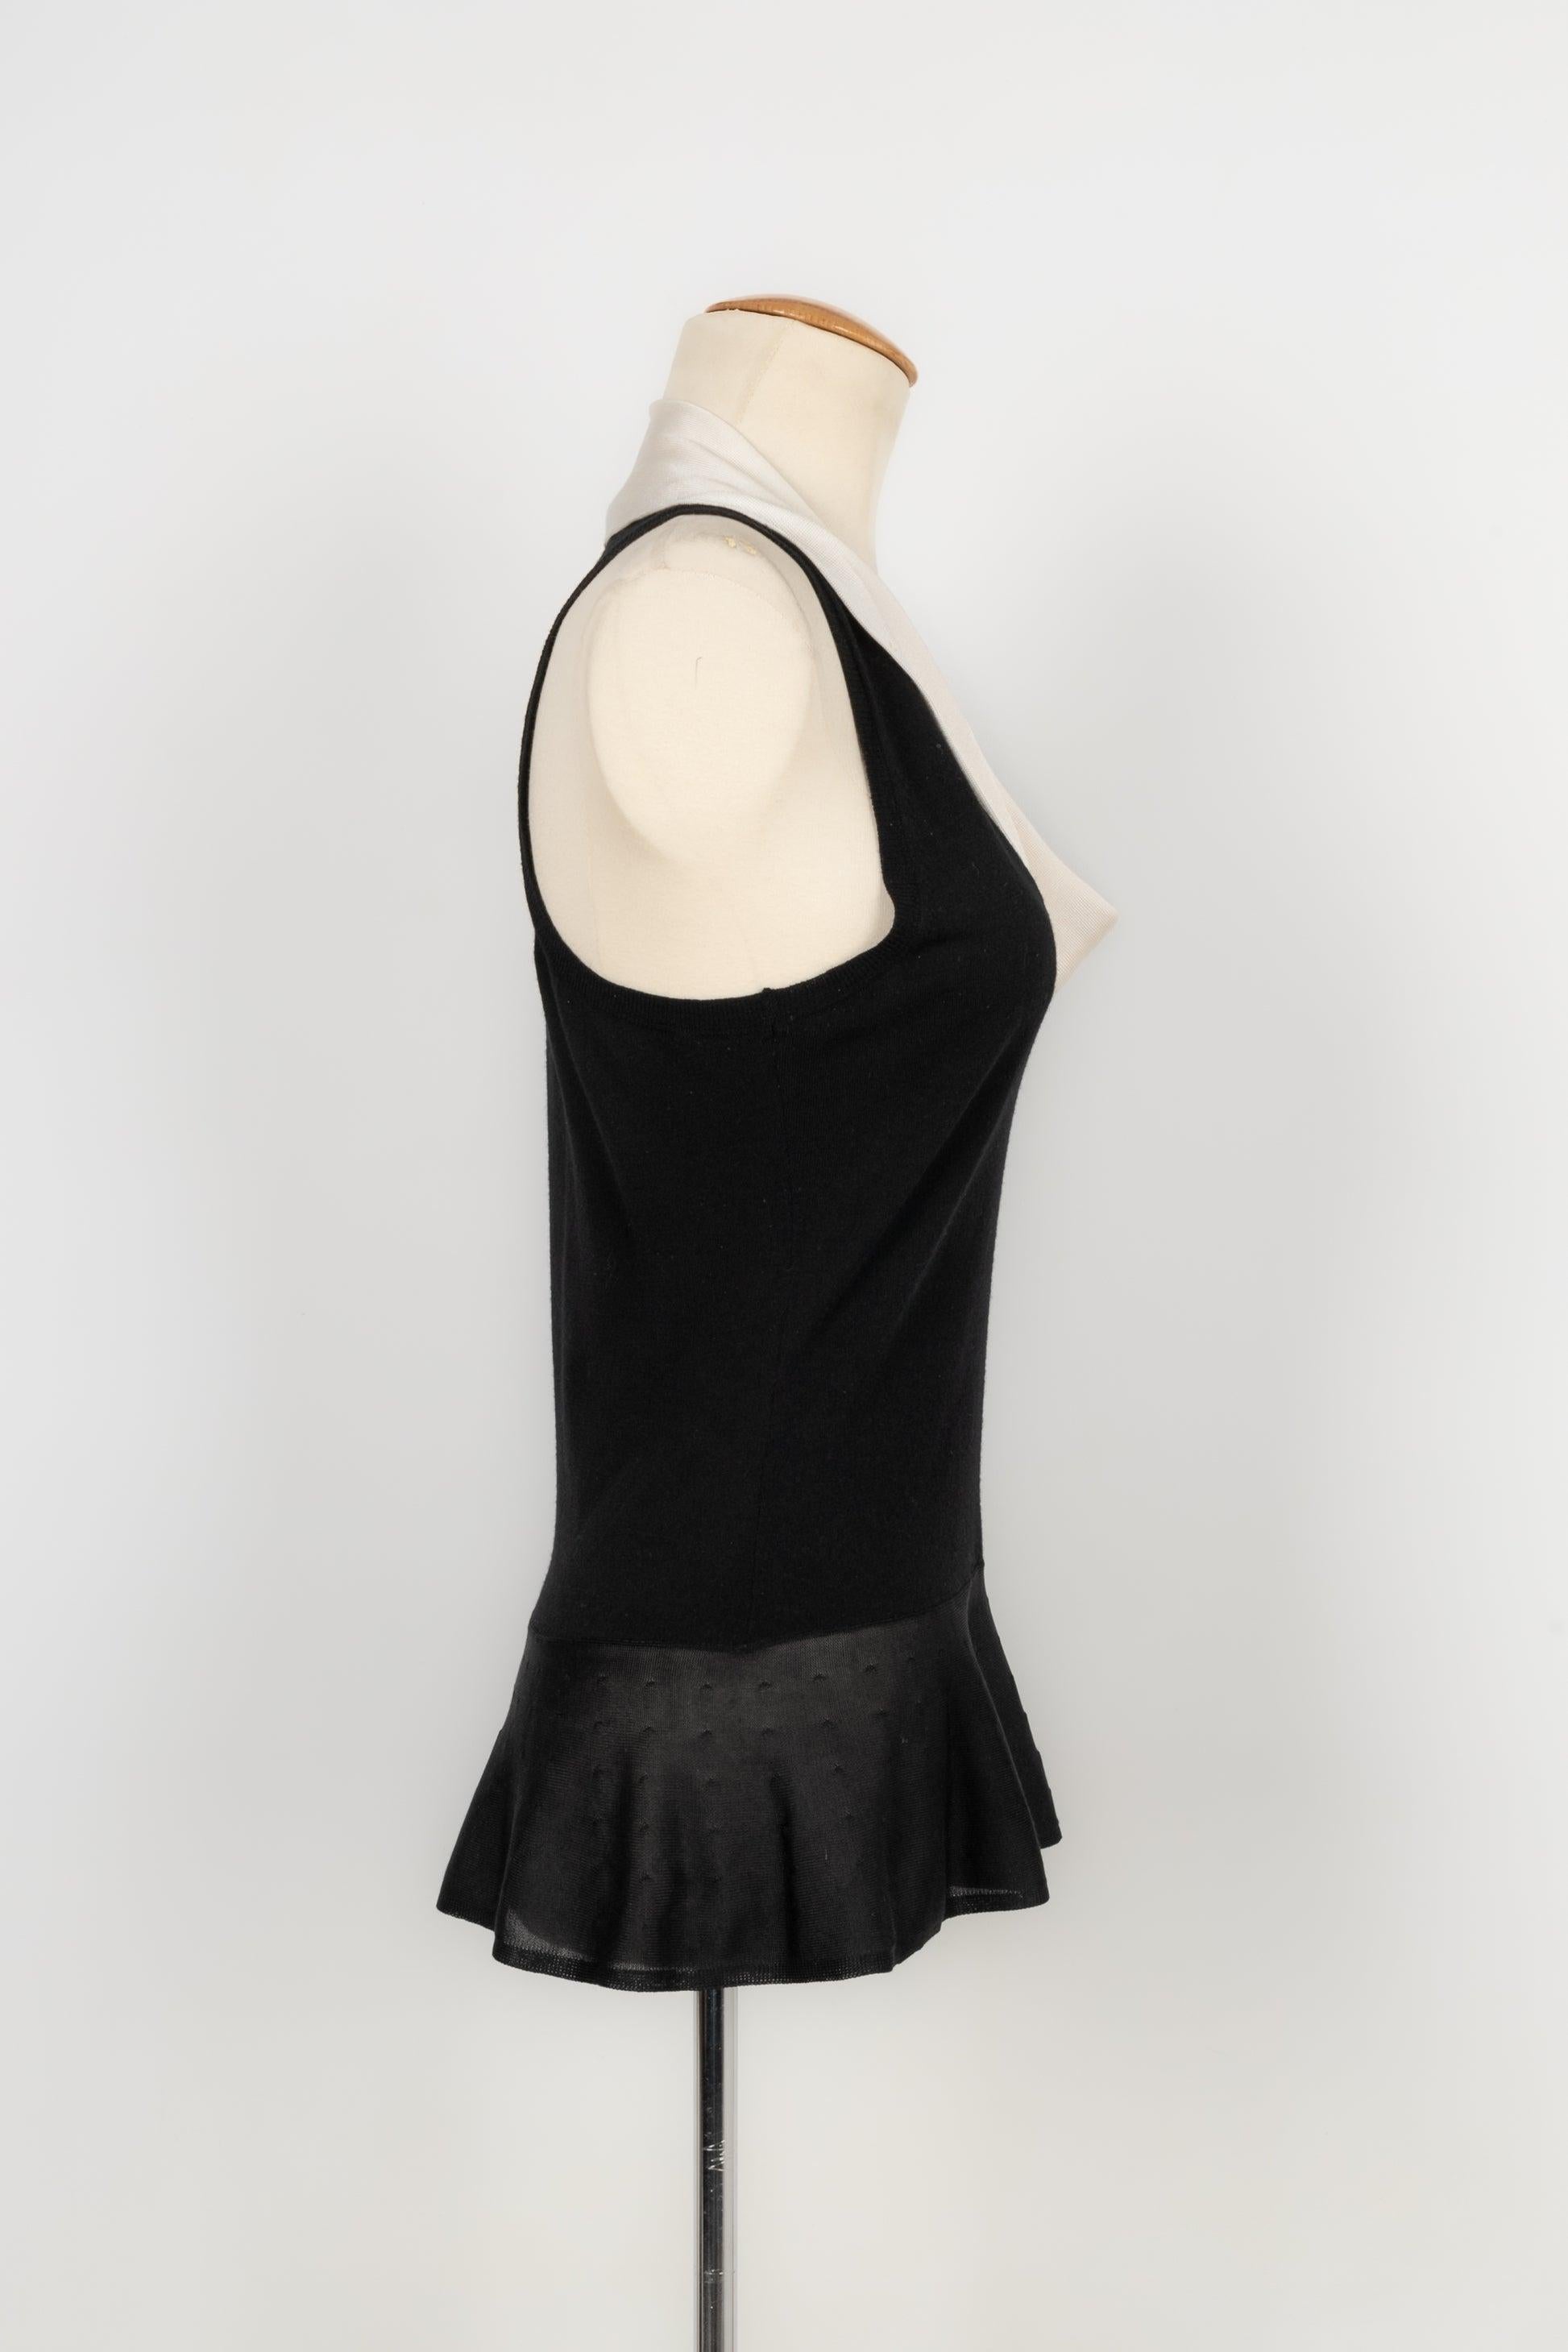 Dior - Black mesh sleeveless top with a white collar. No composition nor size label, it fits a 38FR.

Additional information:
Condition: Very good condition
Dimensions: Chest: 40 cm - Length: 64 cm

Seller Reference: FH129
